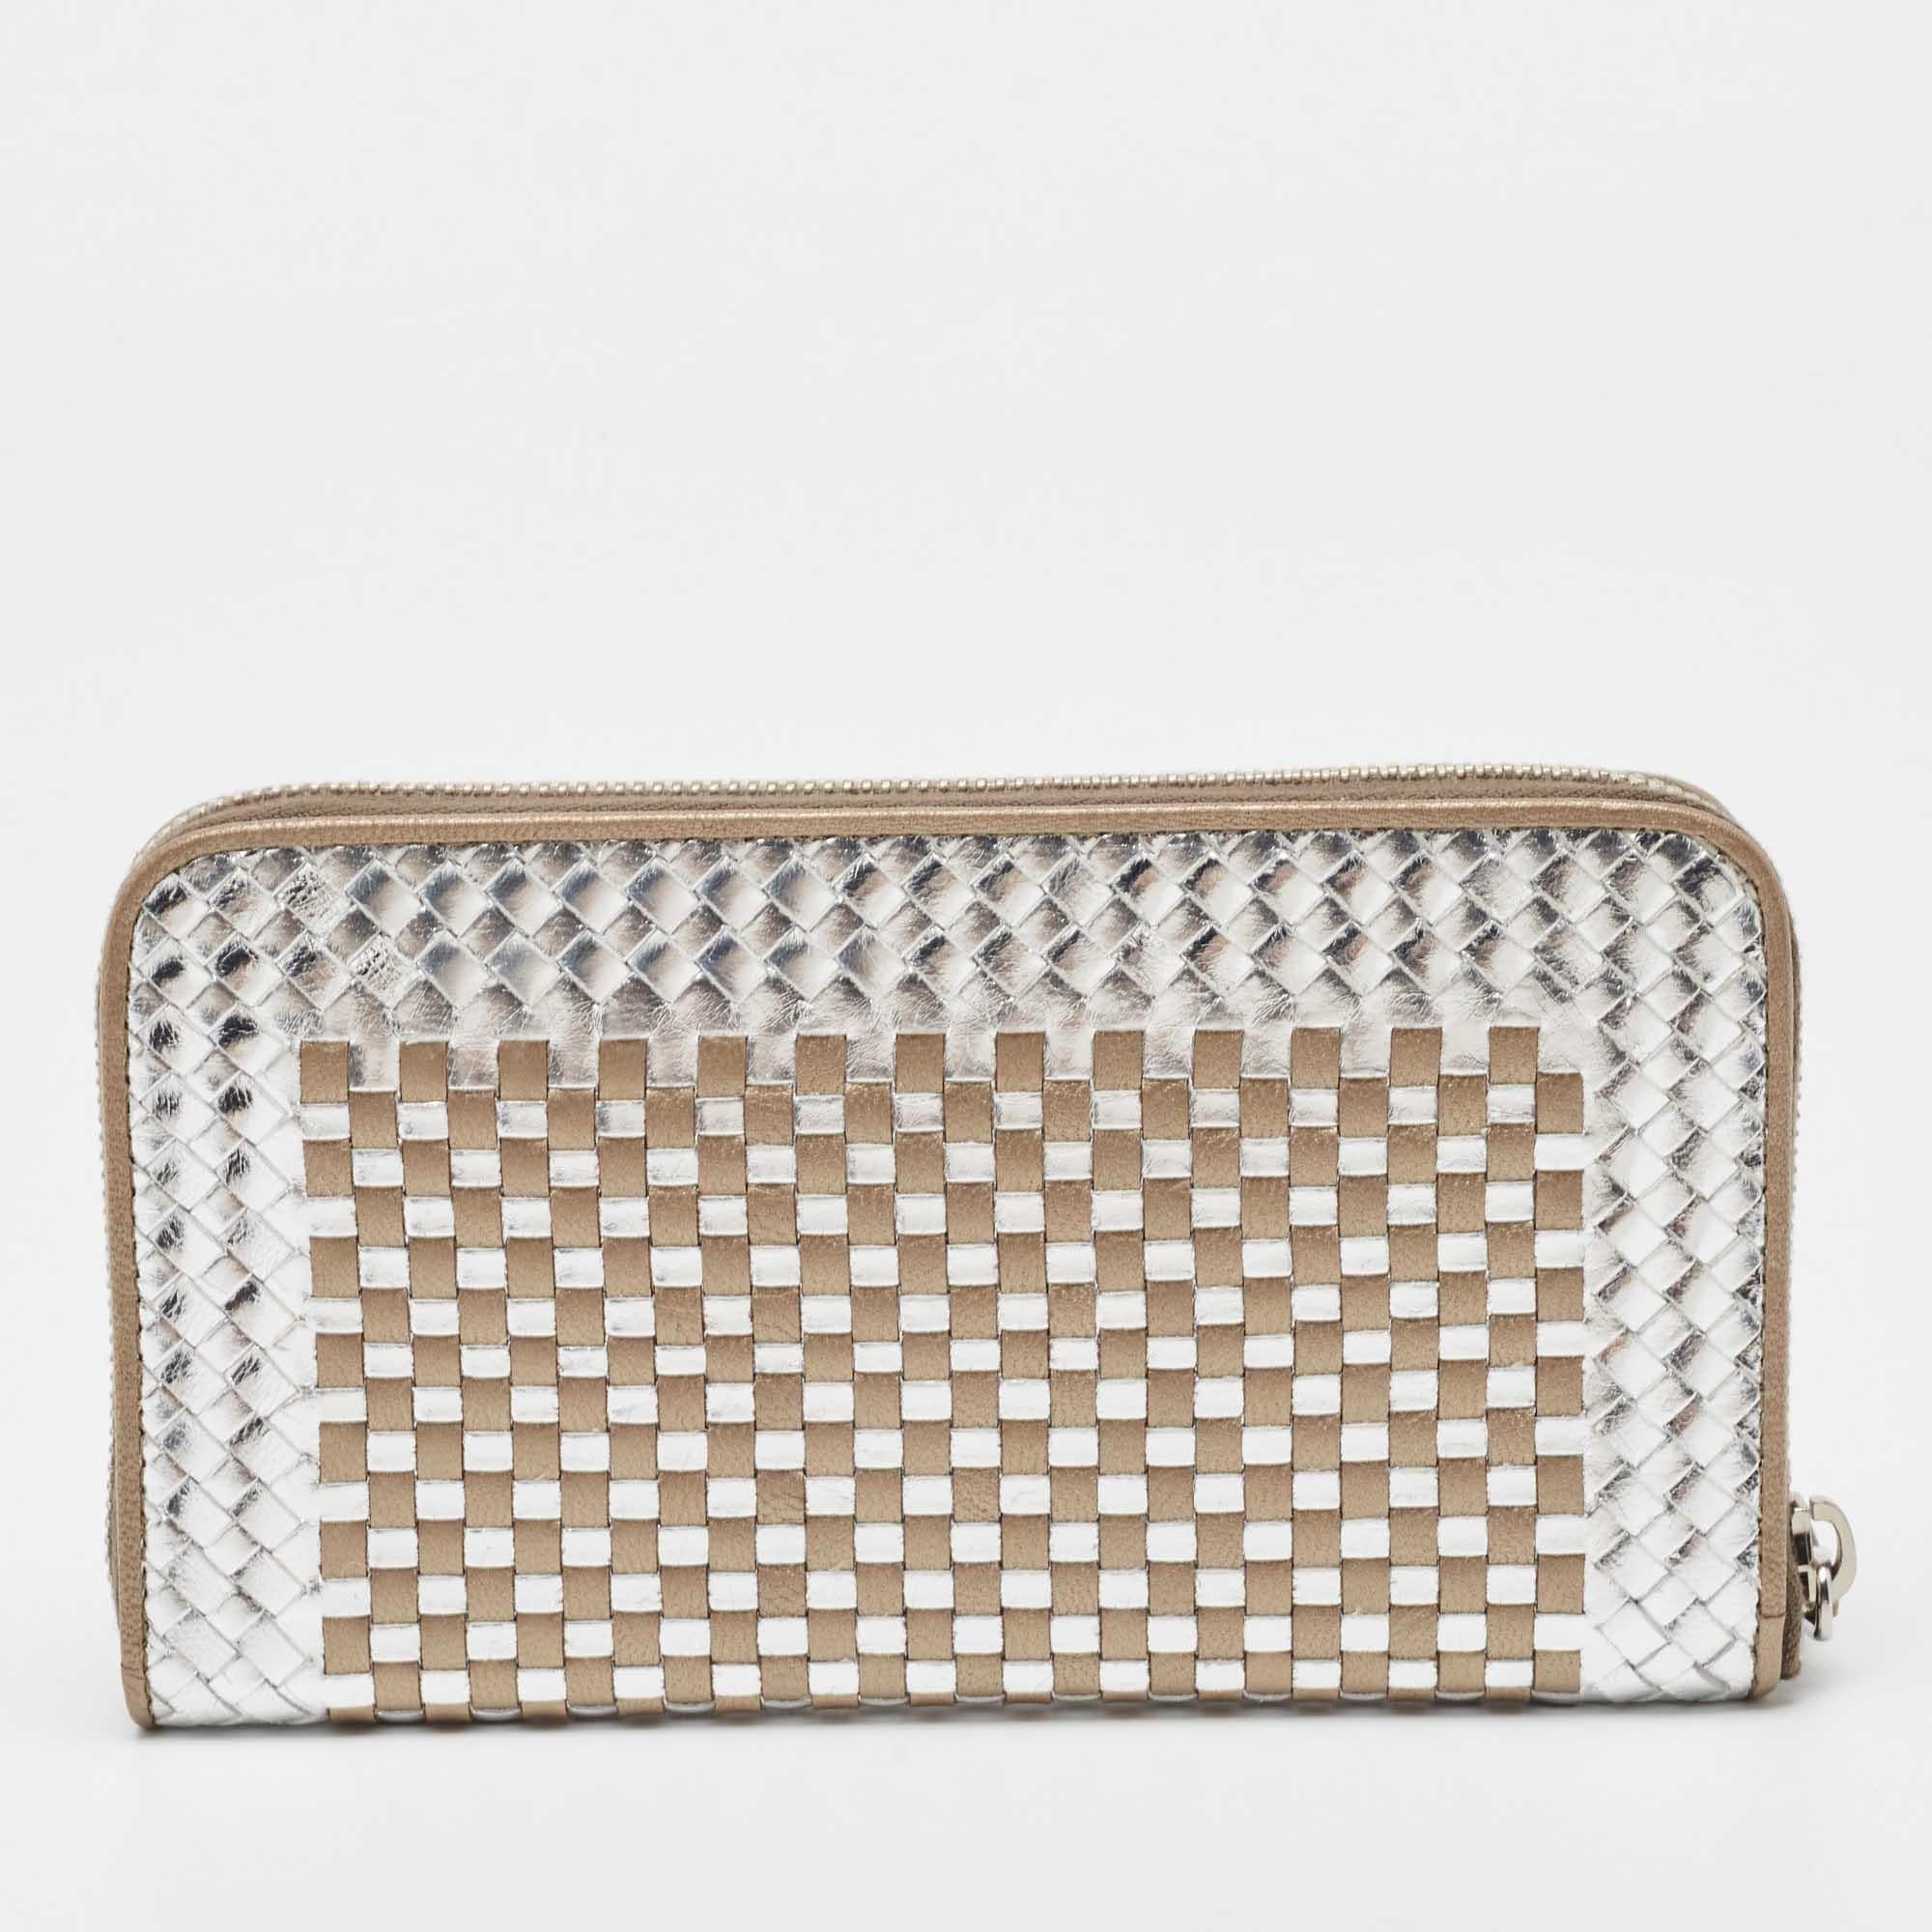 Prada Gold/Silver Woven Madras Leather Zip Around Wallet For Sale 3